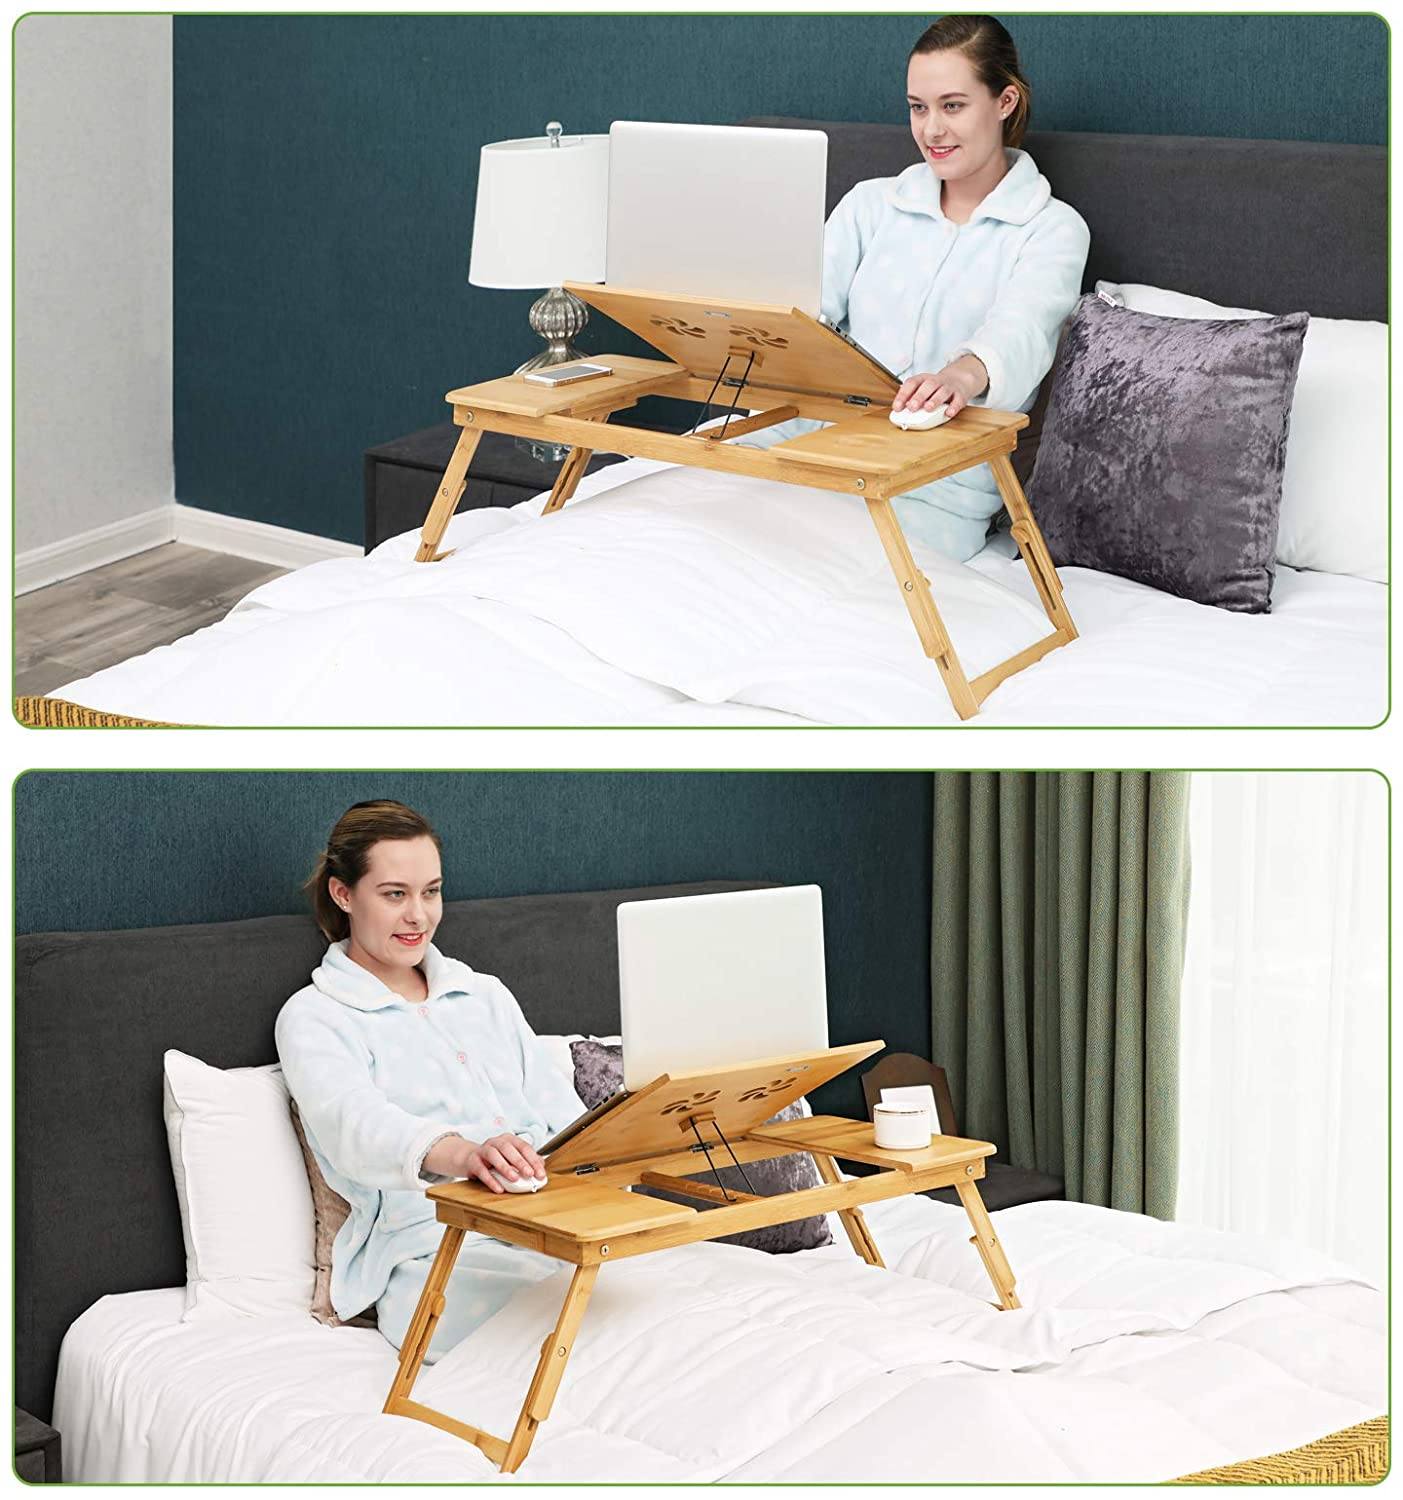 Folding Laptop Table Adjustable Height Lapdesk Desk PC Desktop Notebook Stand Bamboo Sofa Bed Tray 72 x 35 x 29cm with Drawer for left- and right-hander LLD004 RAW58.dk